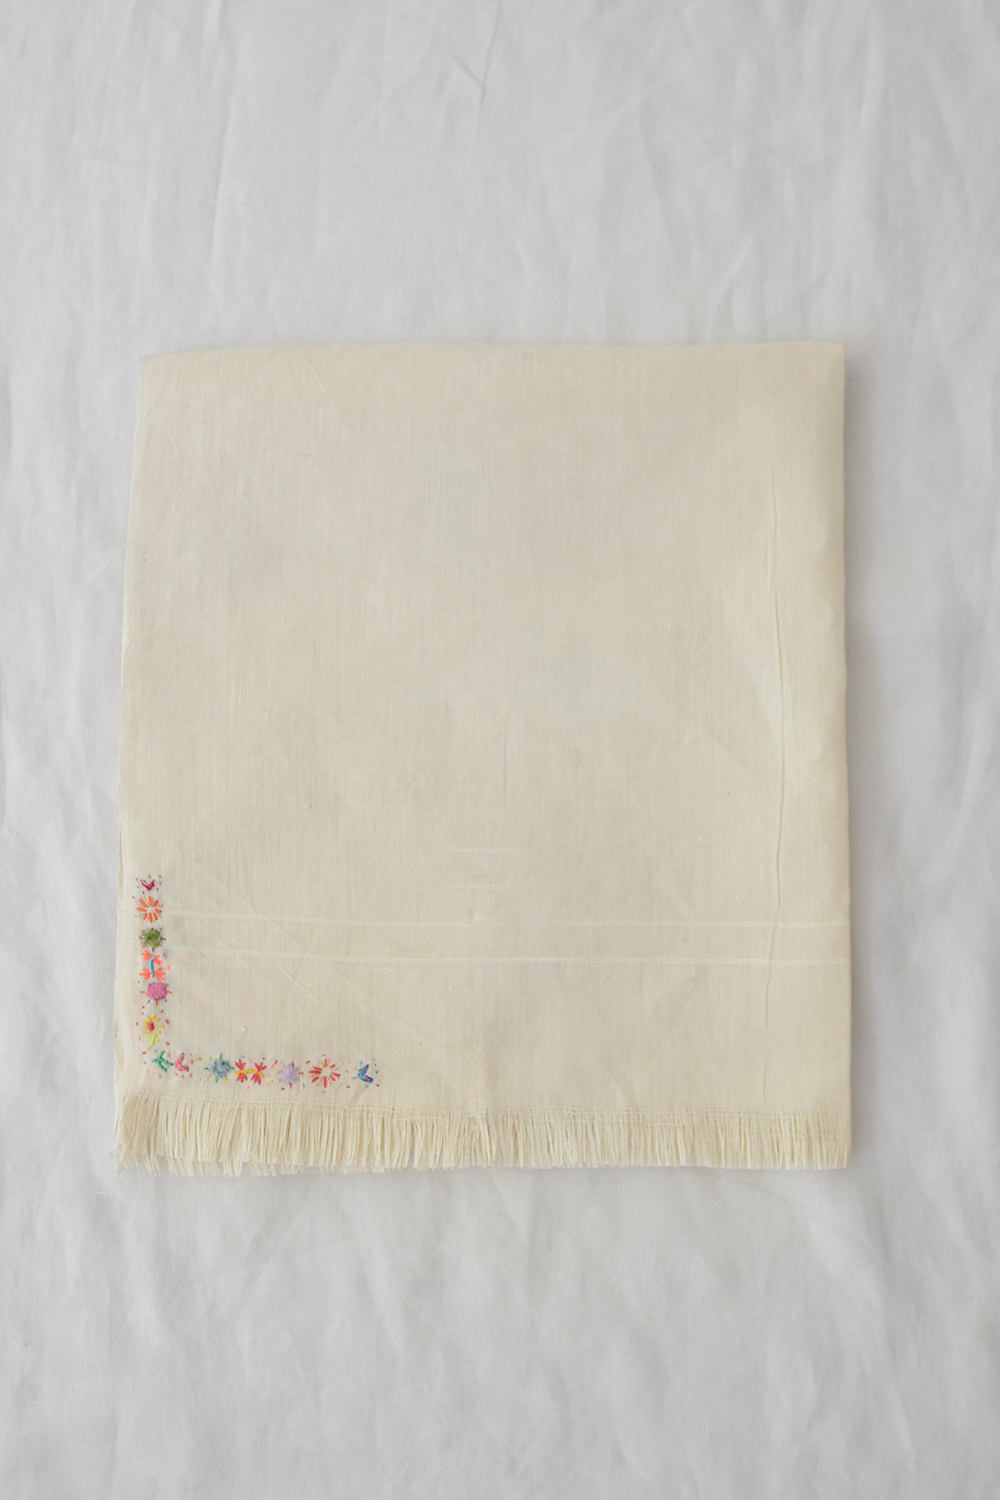 antonia rossi embroidered napkins top picture